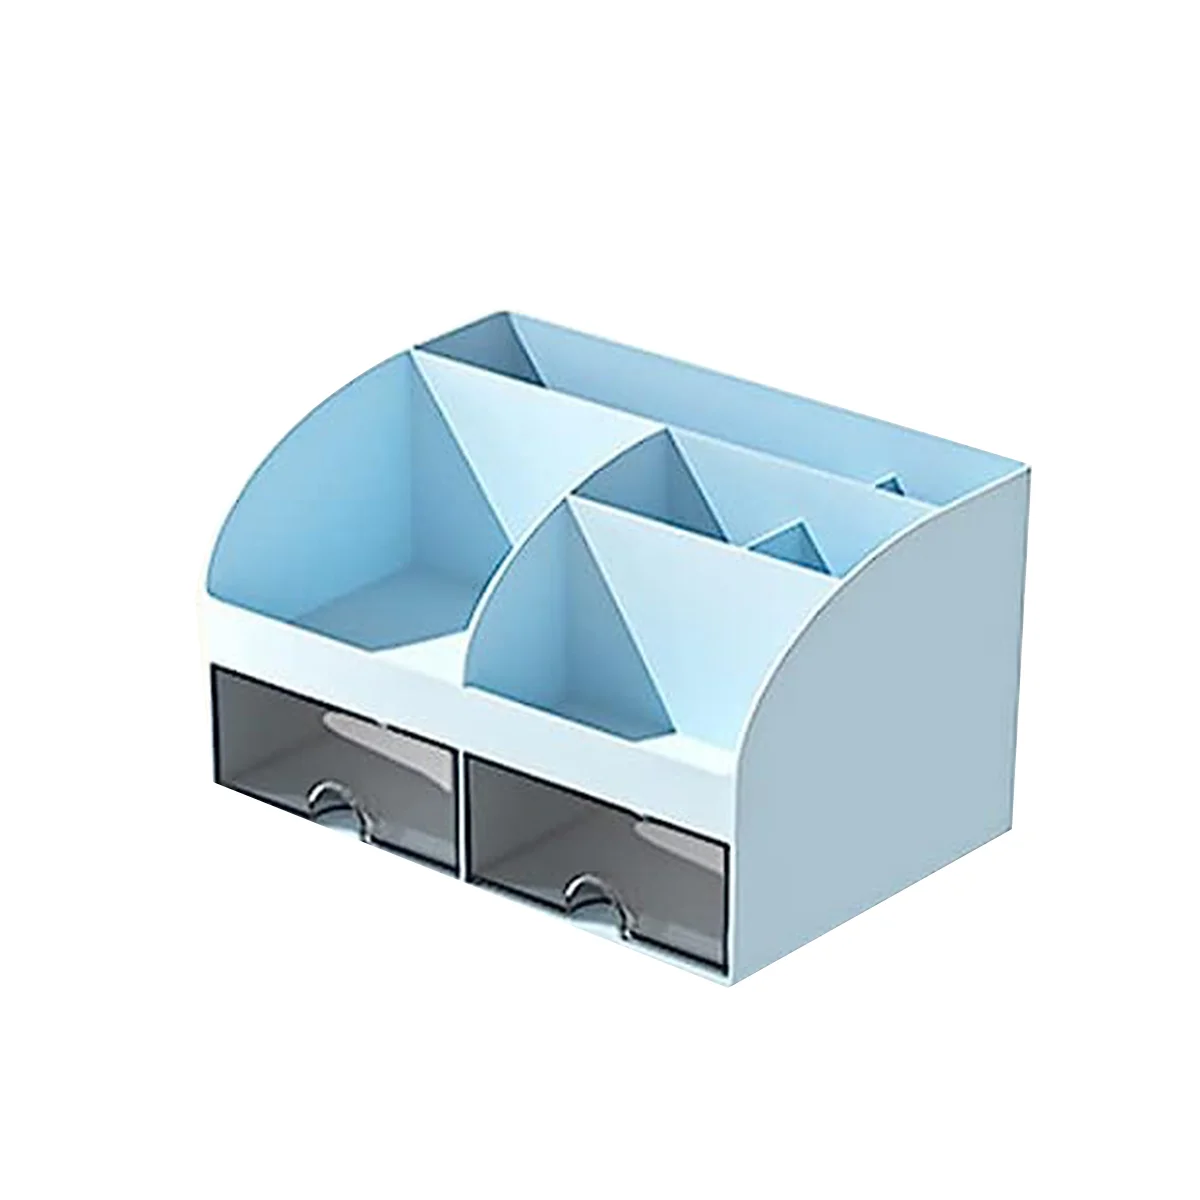 

Desk Organiser-Office Organiser with 6 Compartments and 2 Small Drawers, Desk Storage Box for Pen Holders, Remote Blue